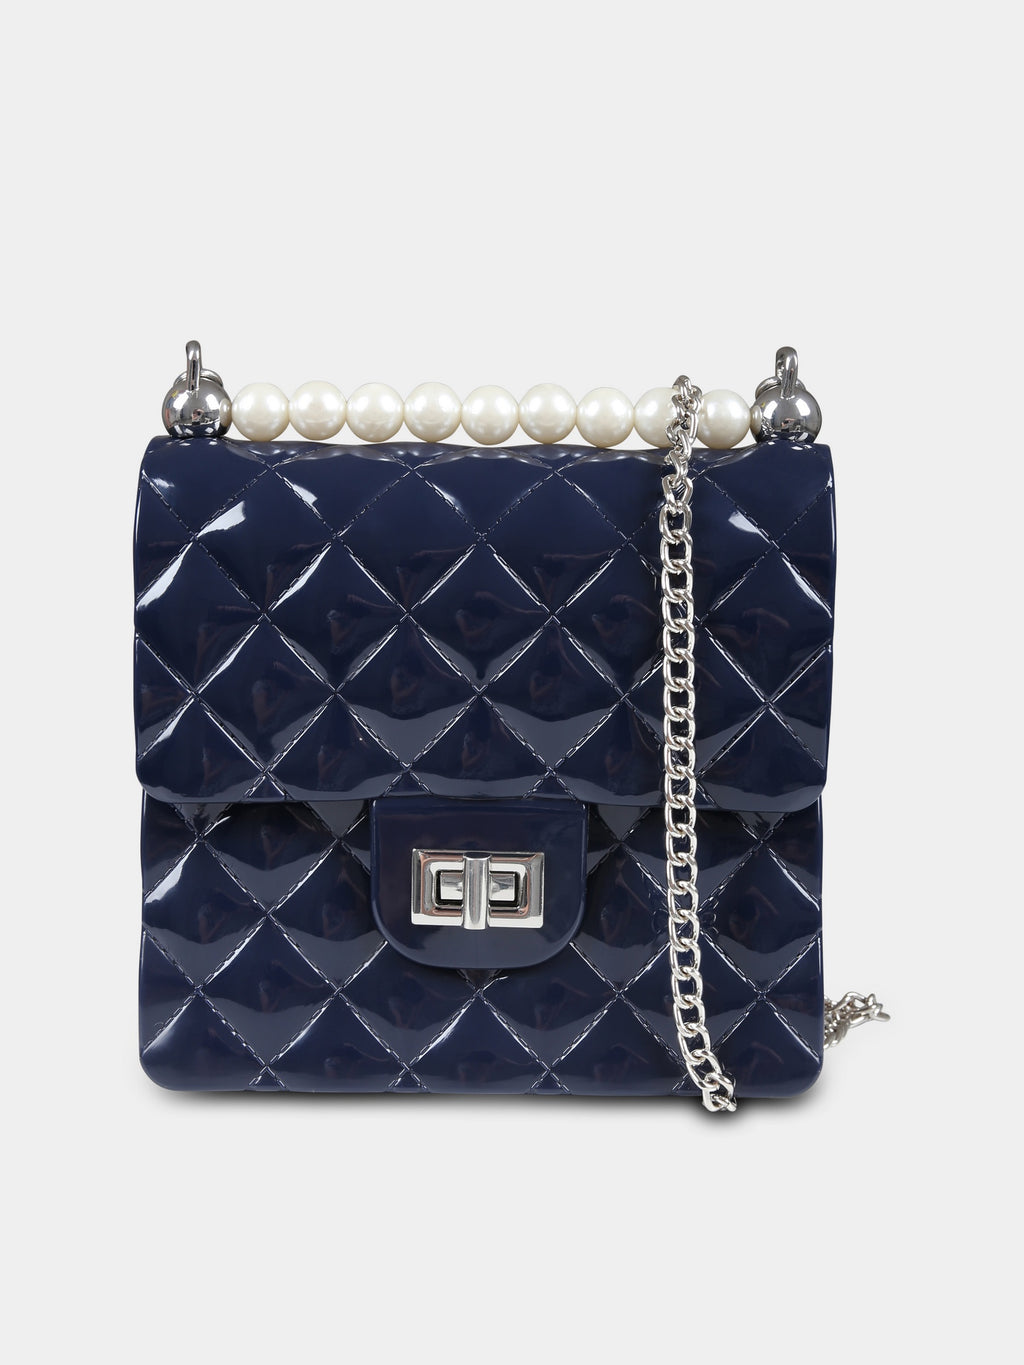 Blue bag for girl with pearls